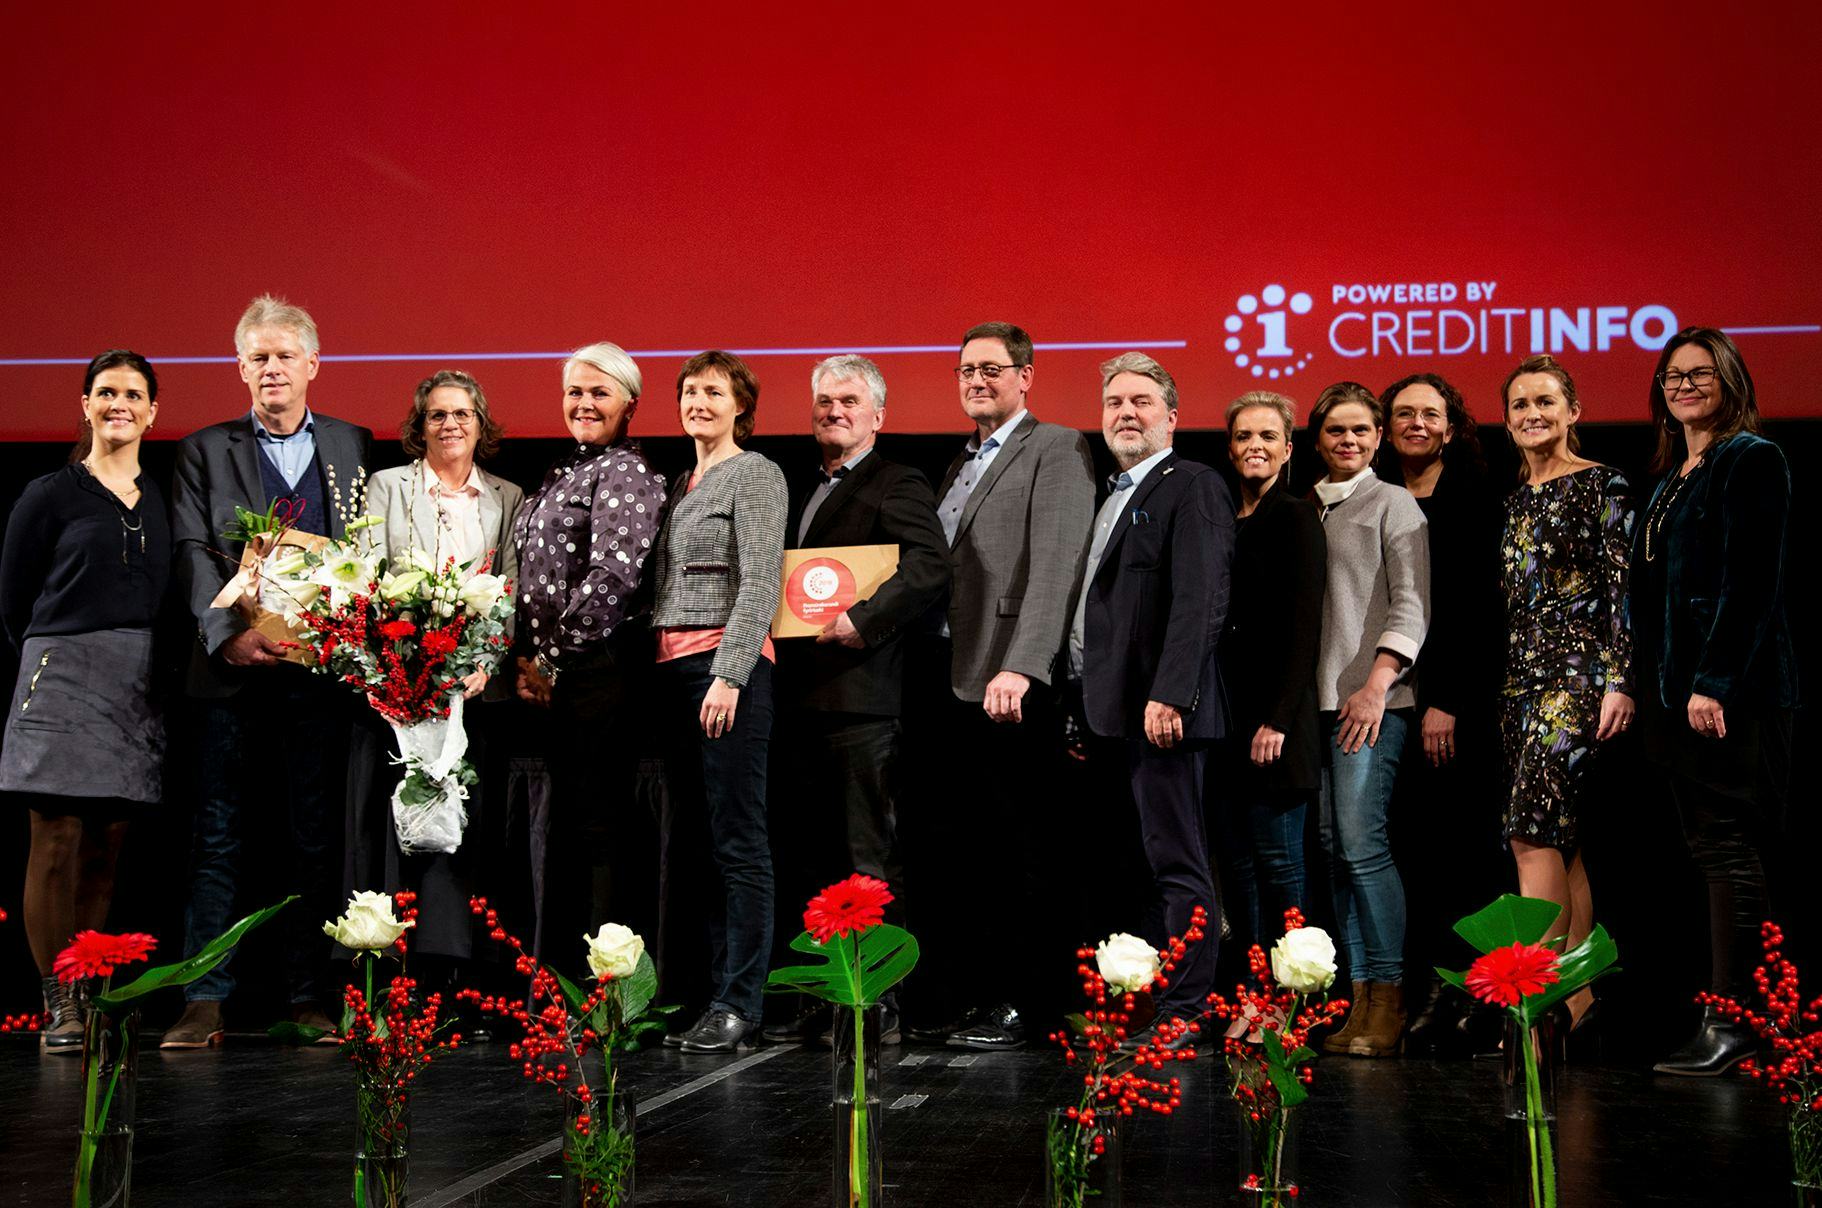 A group of people standing on a stage holding bouquet and certificate hosted by CreditInfo